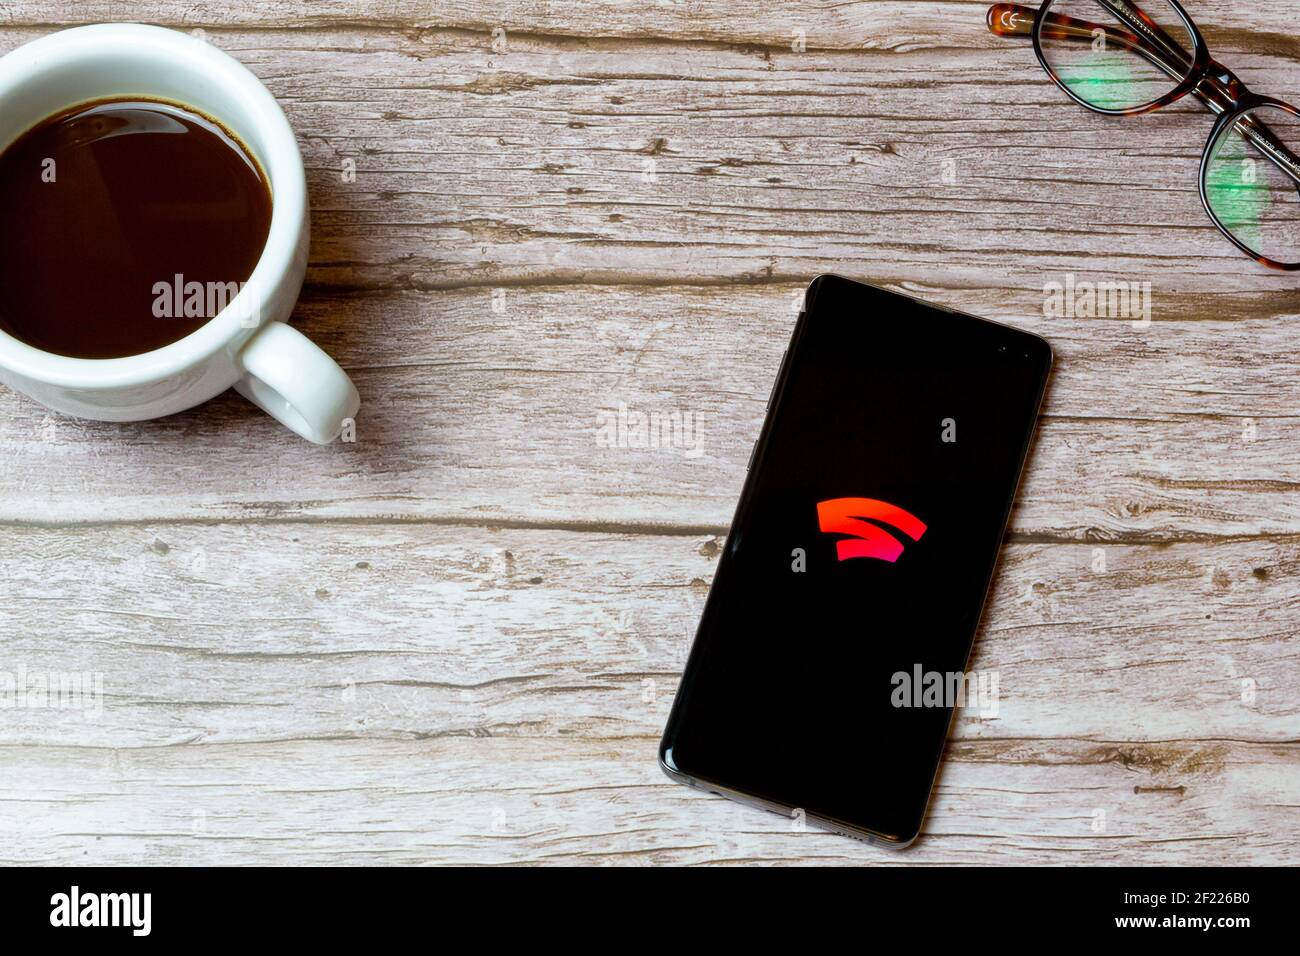 A Mobile phone or cell phone laid on a table or desk with the Google stadia app open and a coffee next to it Stock Photo